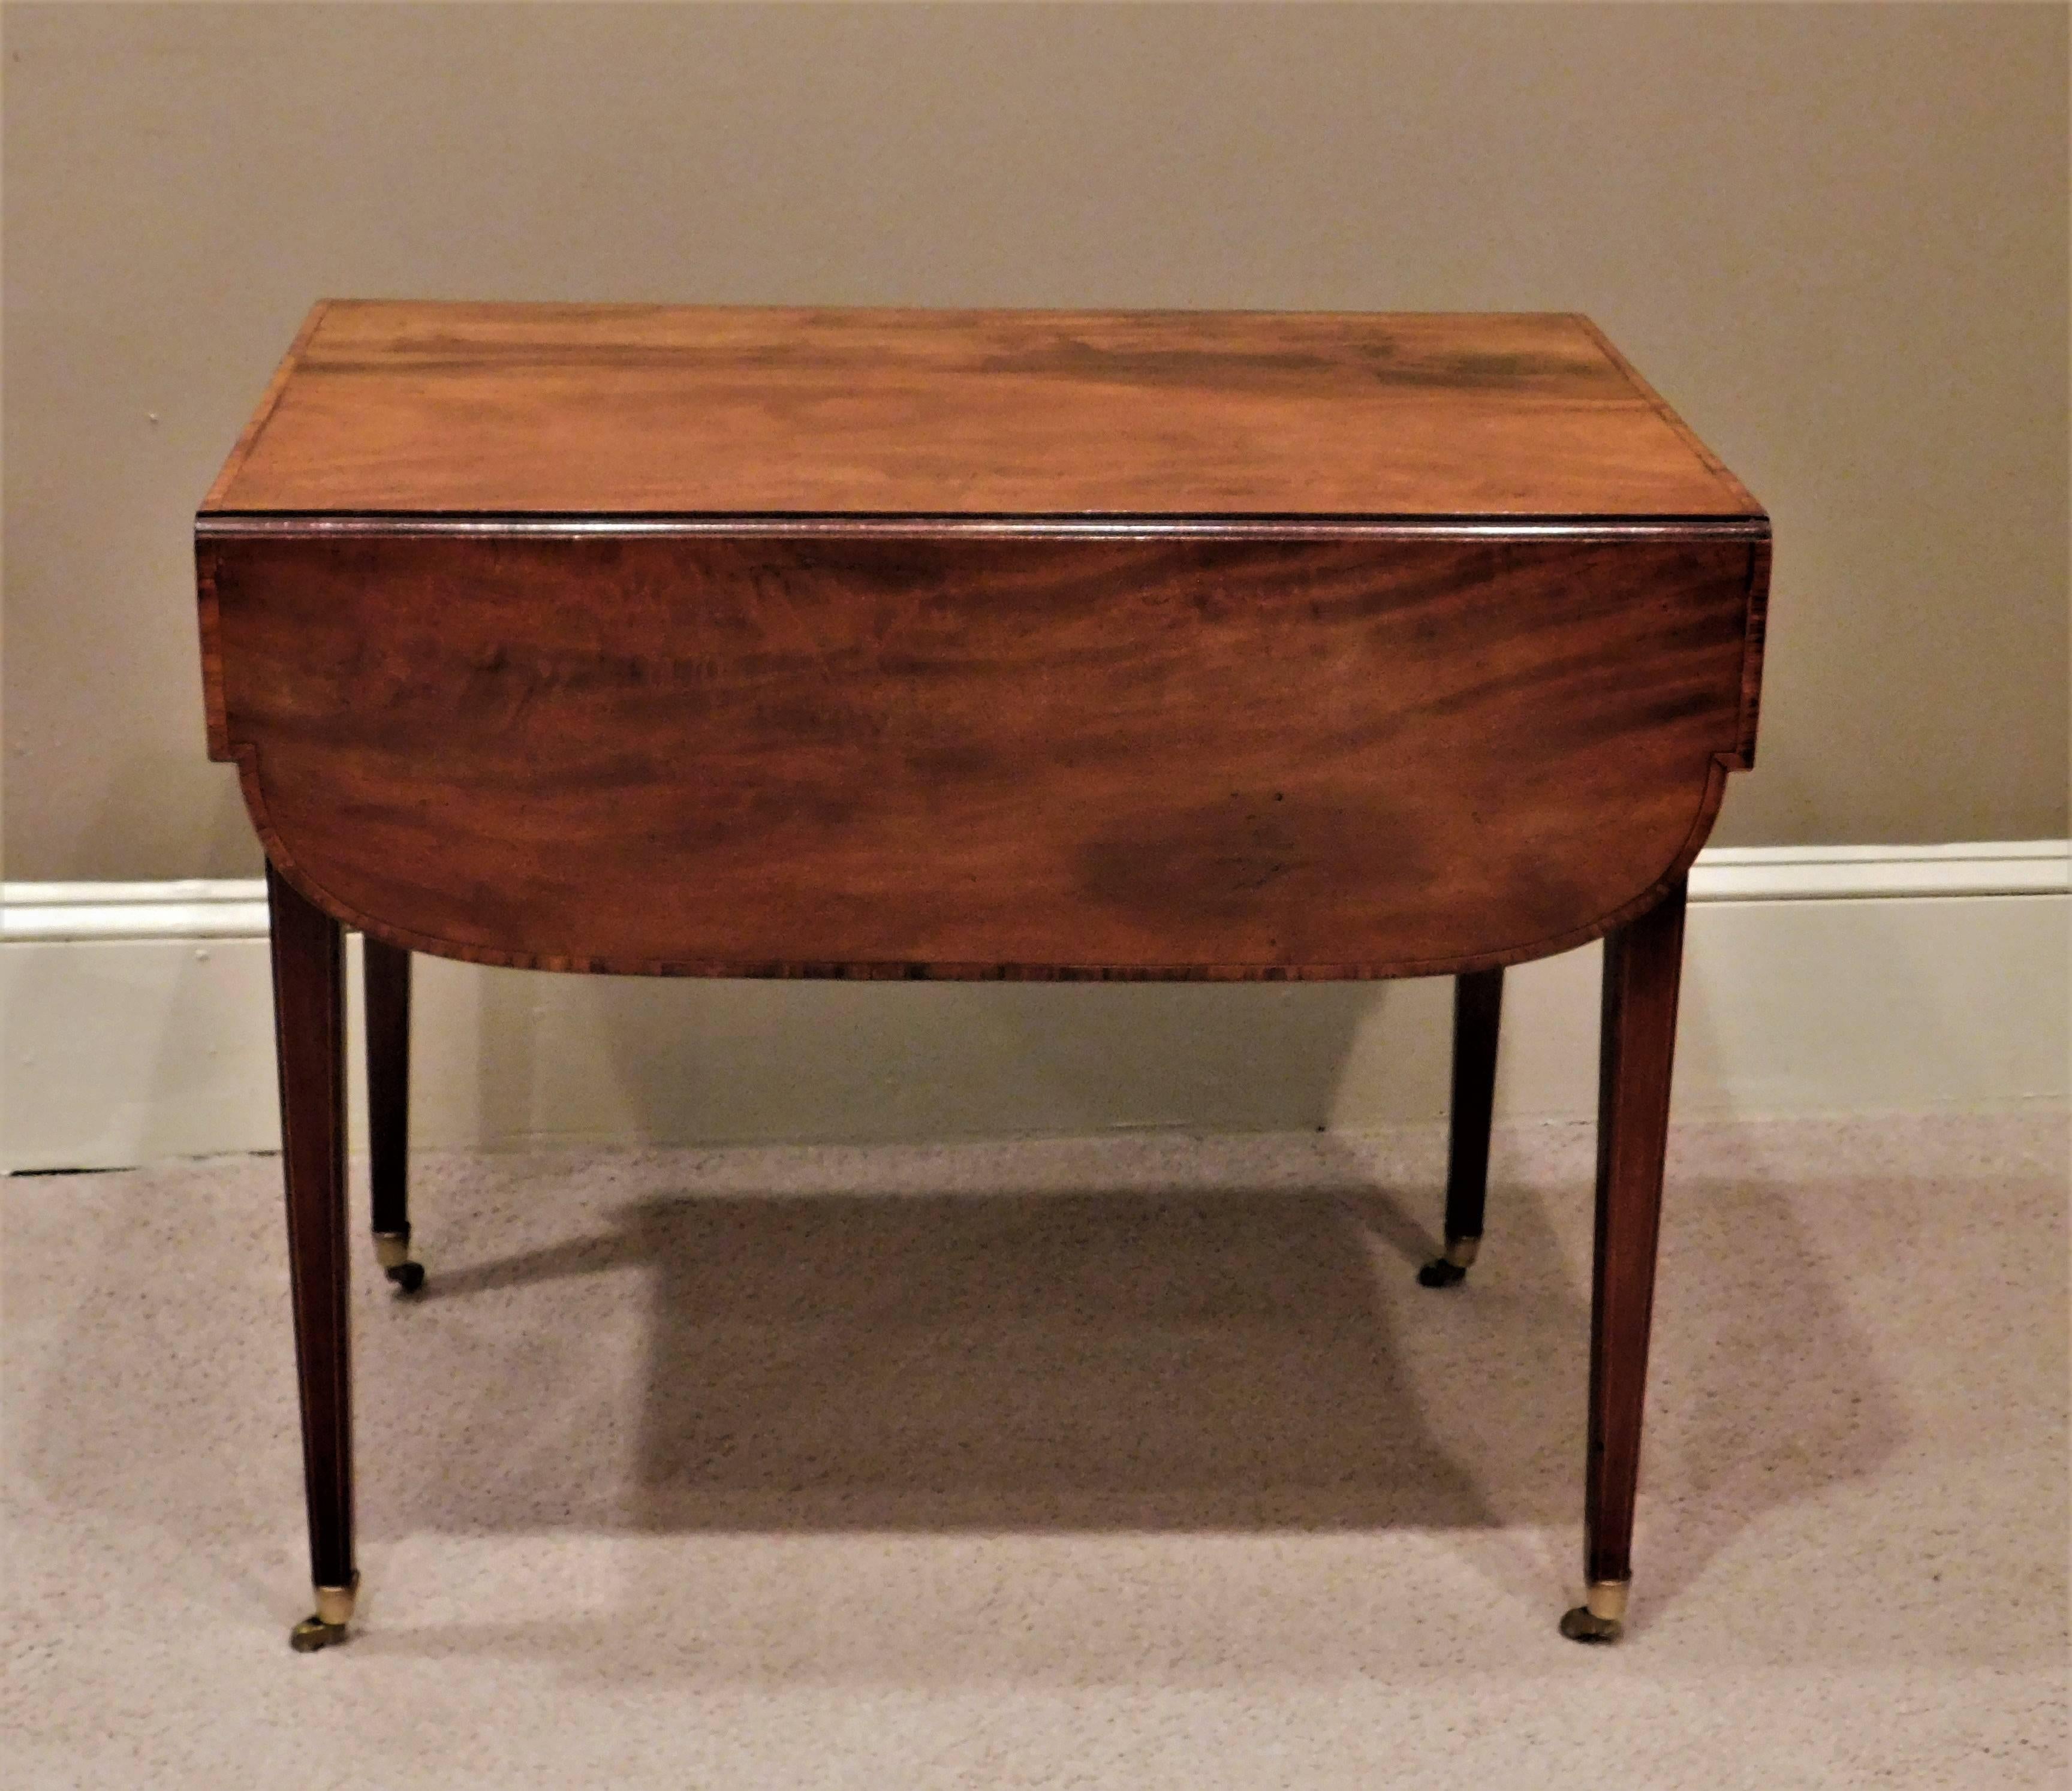 Highly figured plum pudding mahogany with birch and holly inlay. Top is cross-banded in mahogany. Oval and string inlay, tapered legs shaped skirt. One drawer and one faux drawer. With leaves up the width is 38.75